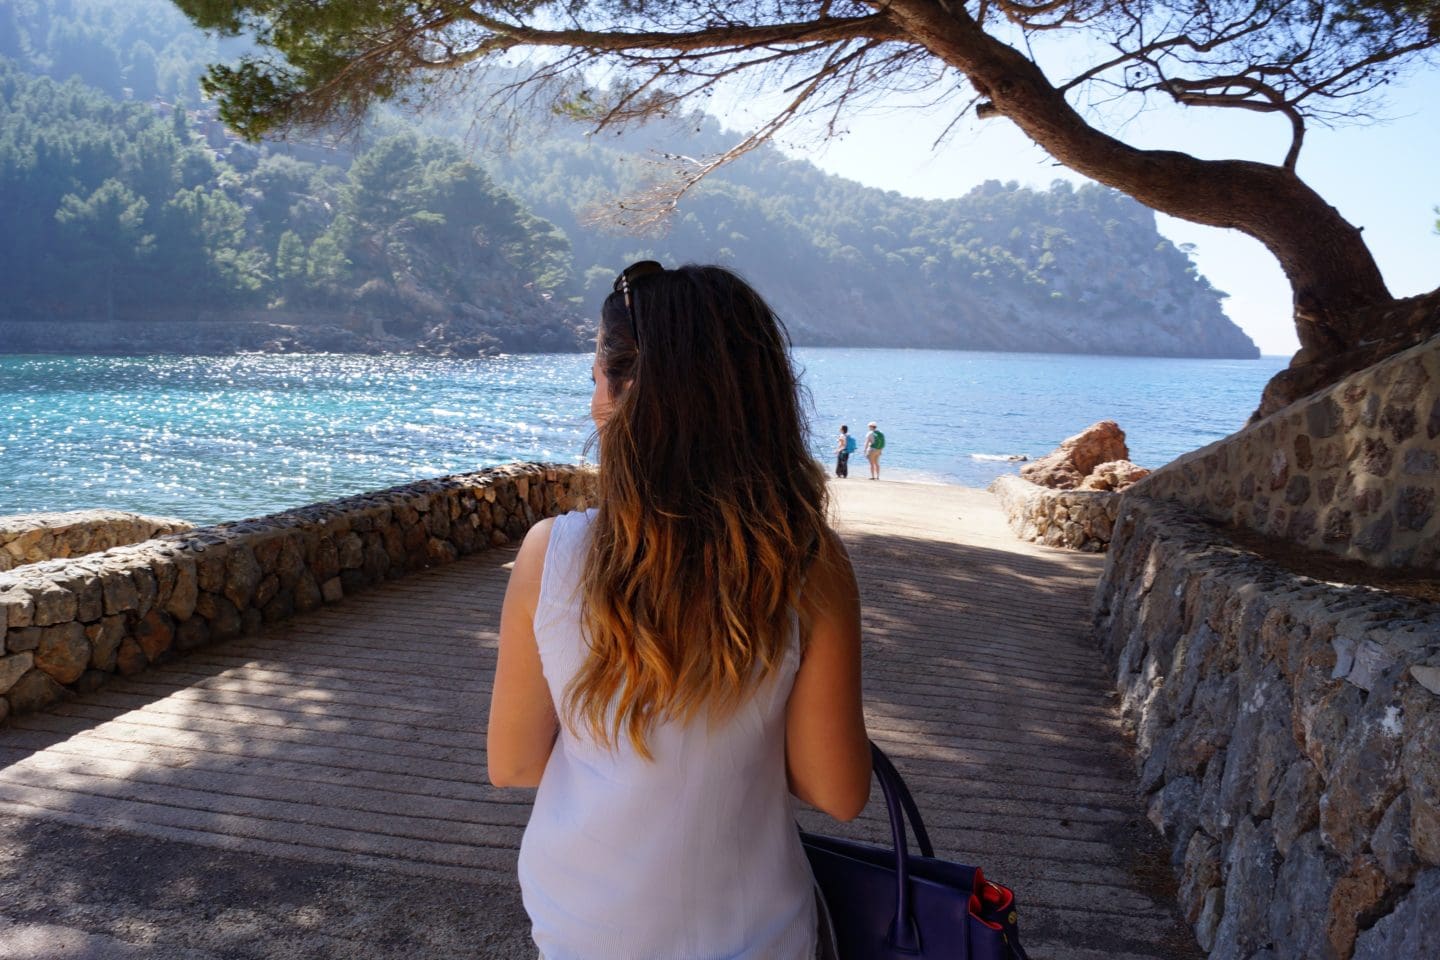 Tips on how to get to Cala Tuent